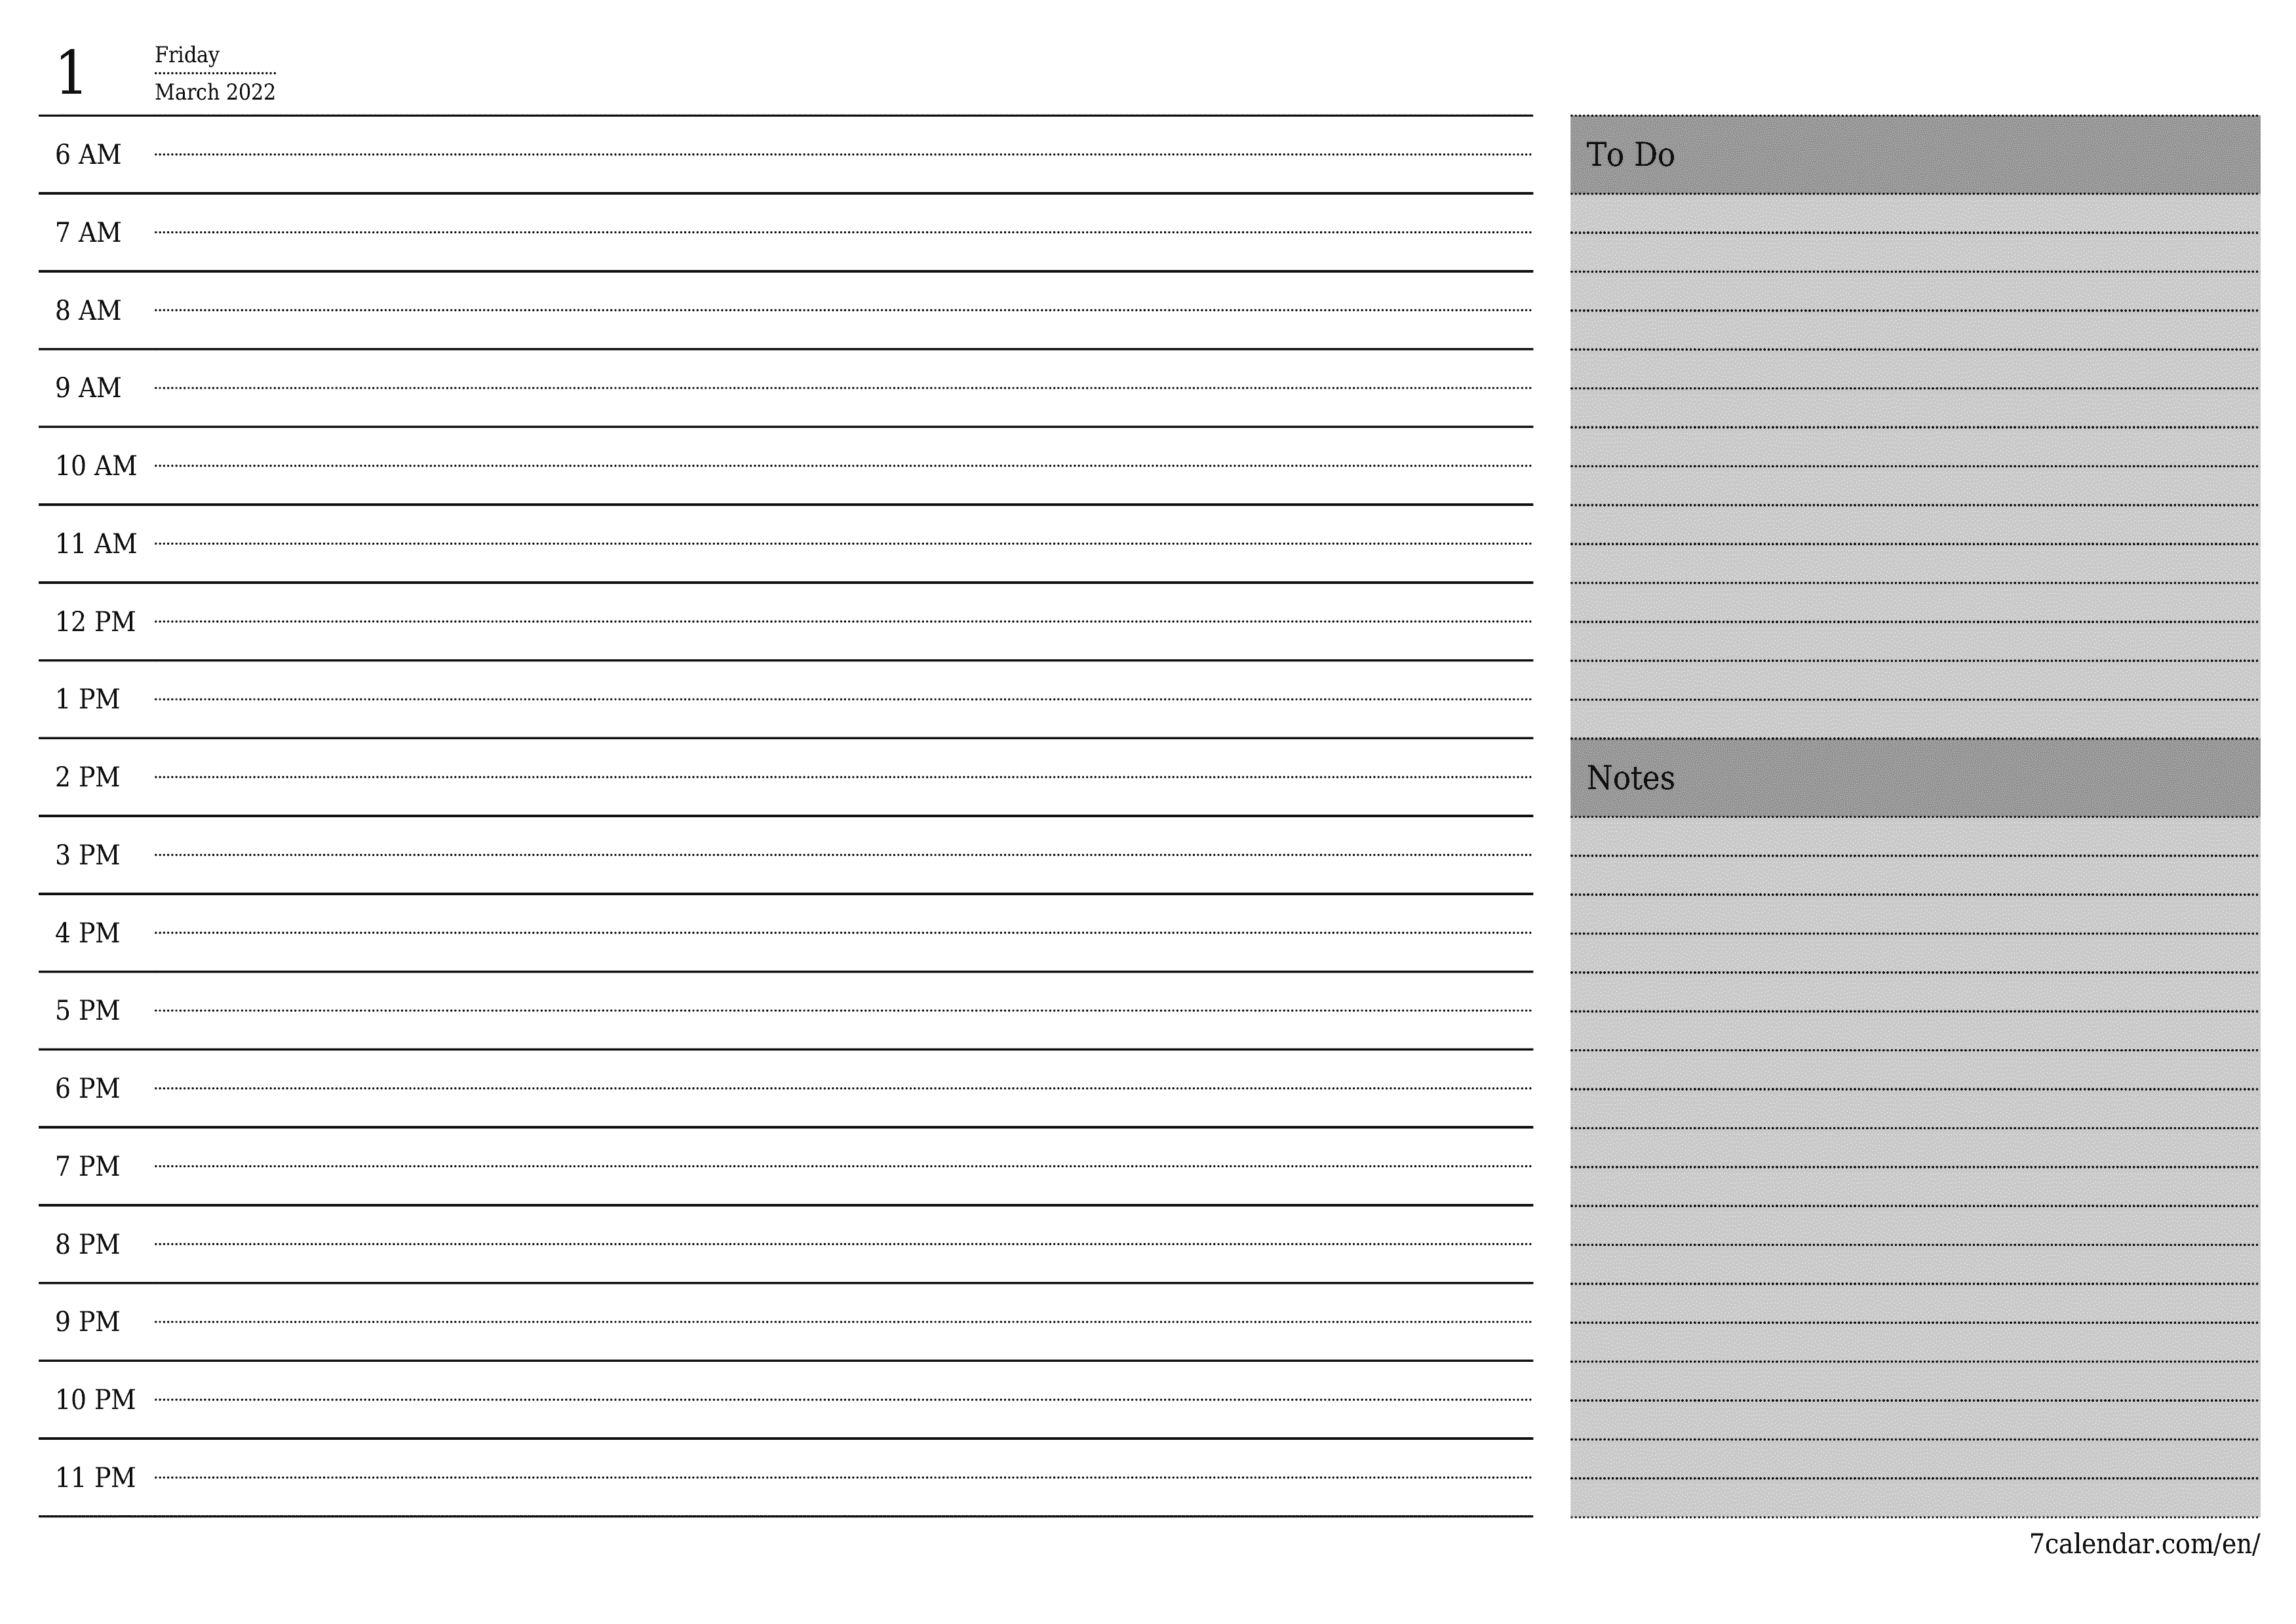 Blank daily calendar planner for day March 2022 with notes, save and print to PDF PNG English - 7calendar.com